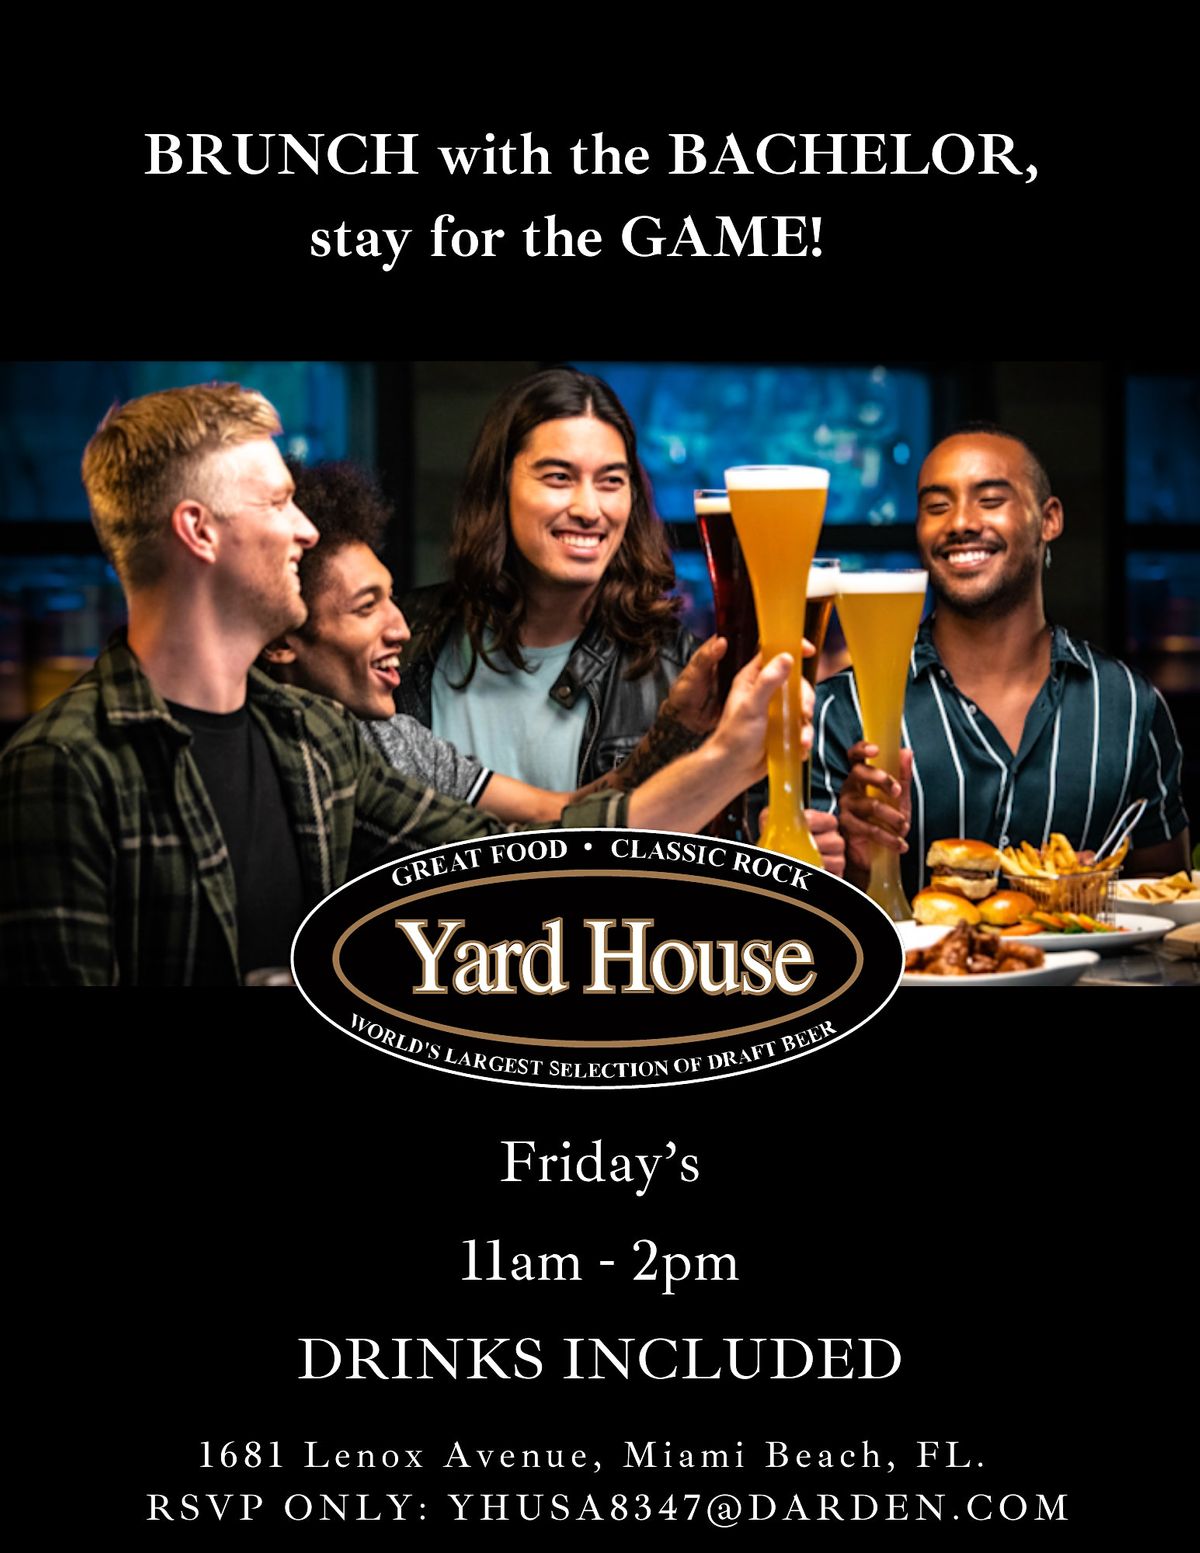 Brunch with the Bachelor, stay for the Game at Yard House Miami Beach!